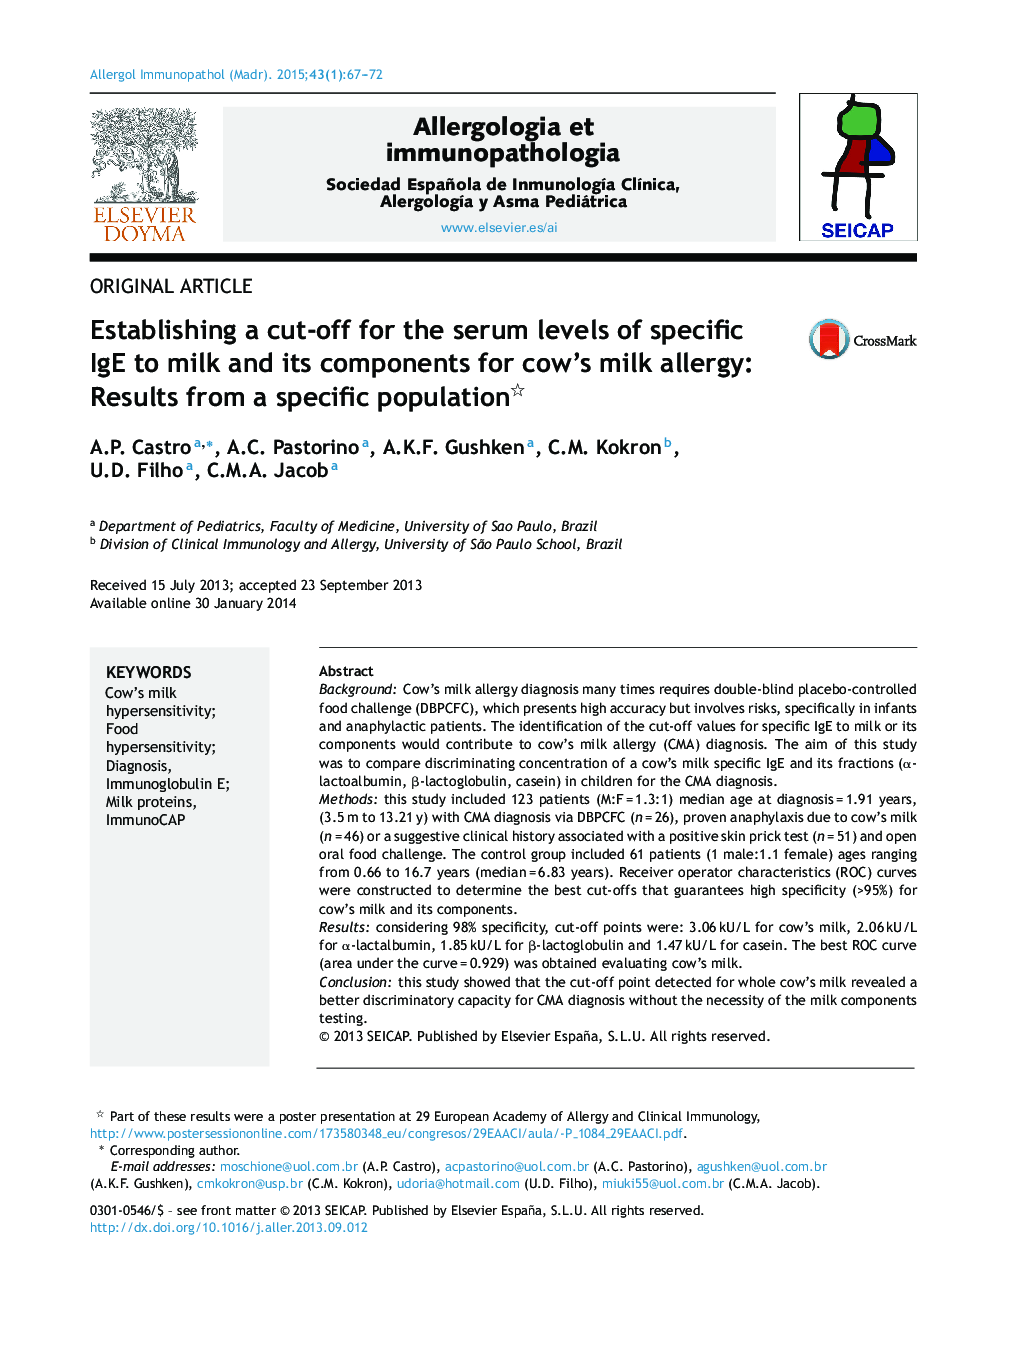 Establishing a cut-off for the serum levels of specific IgE to milk and its components for cow's milk allergy: Results from a specific population